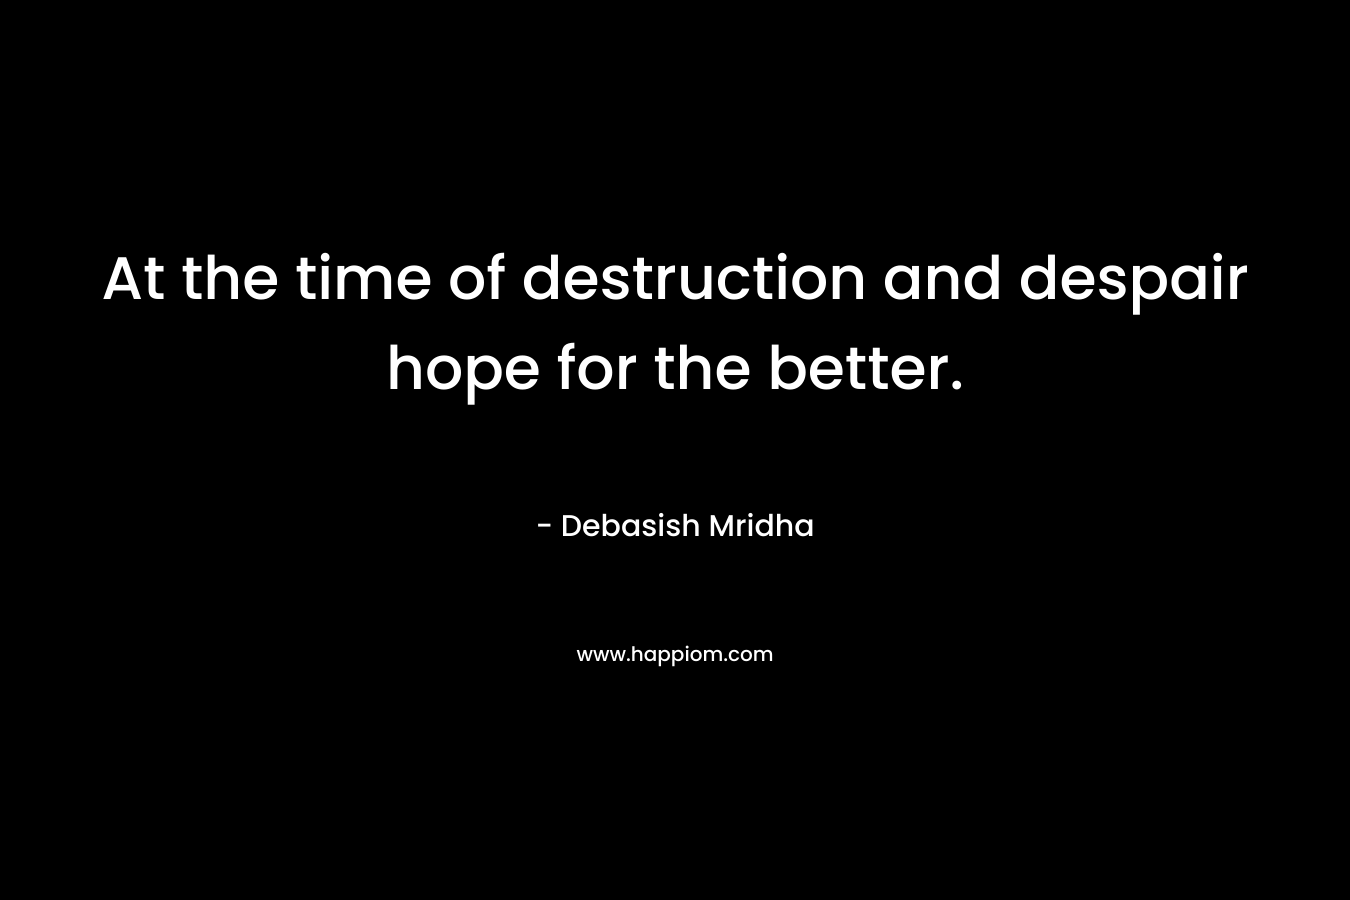 At the time of destruction and despair hope for the better.